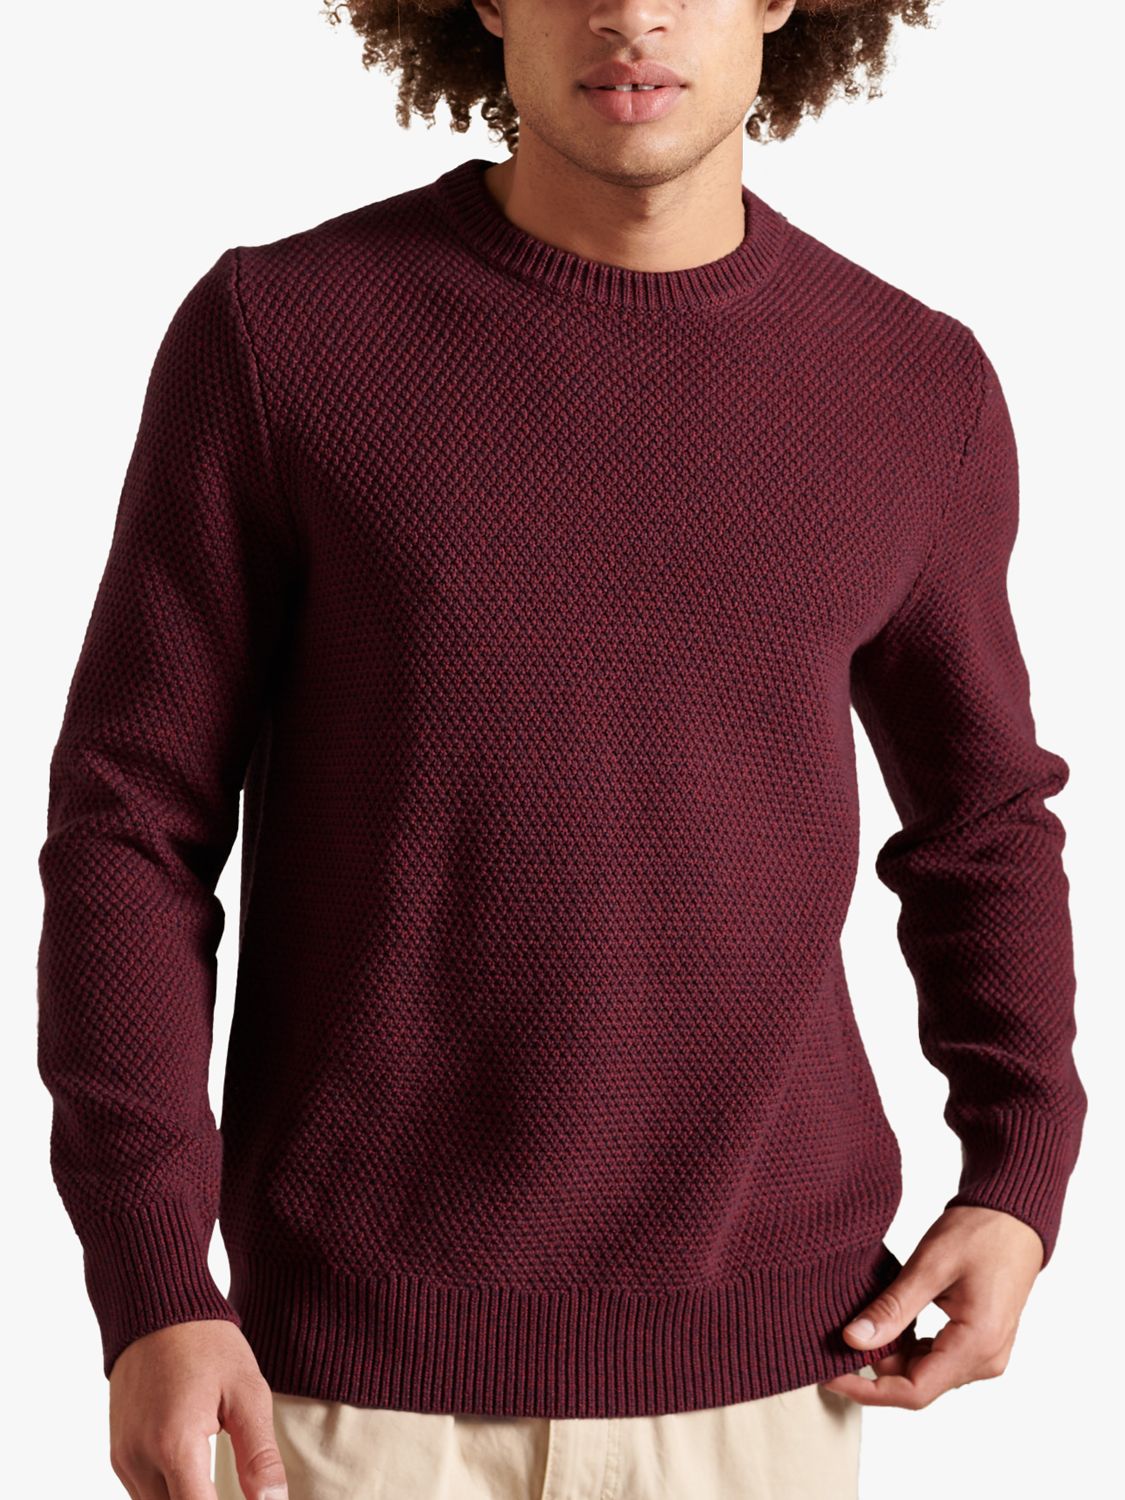 Superdry Textured Twisted Jumper, Deep Red at John Lewis & Partners